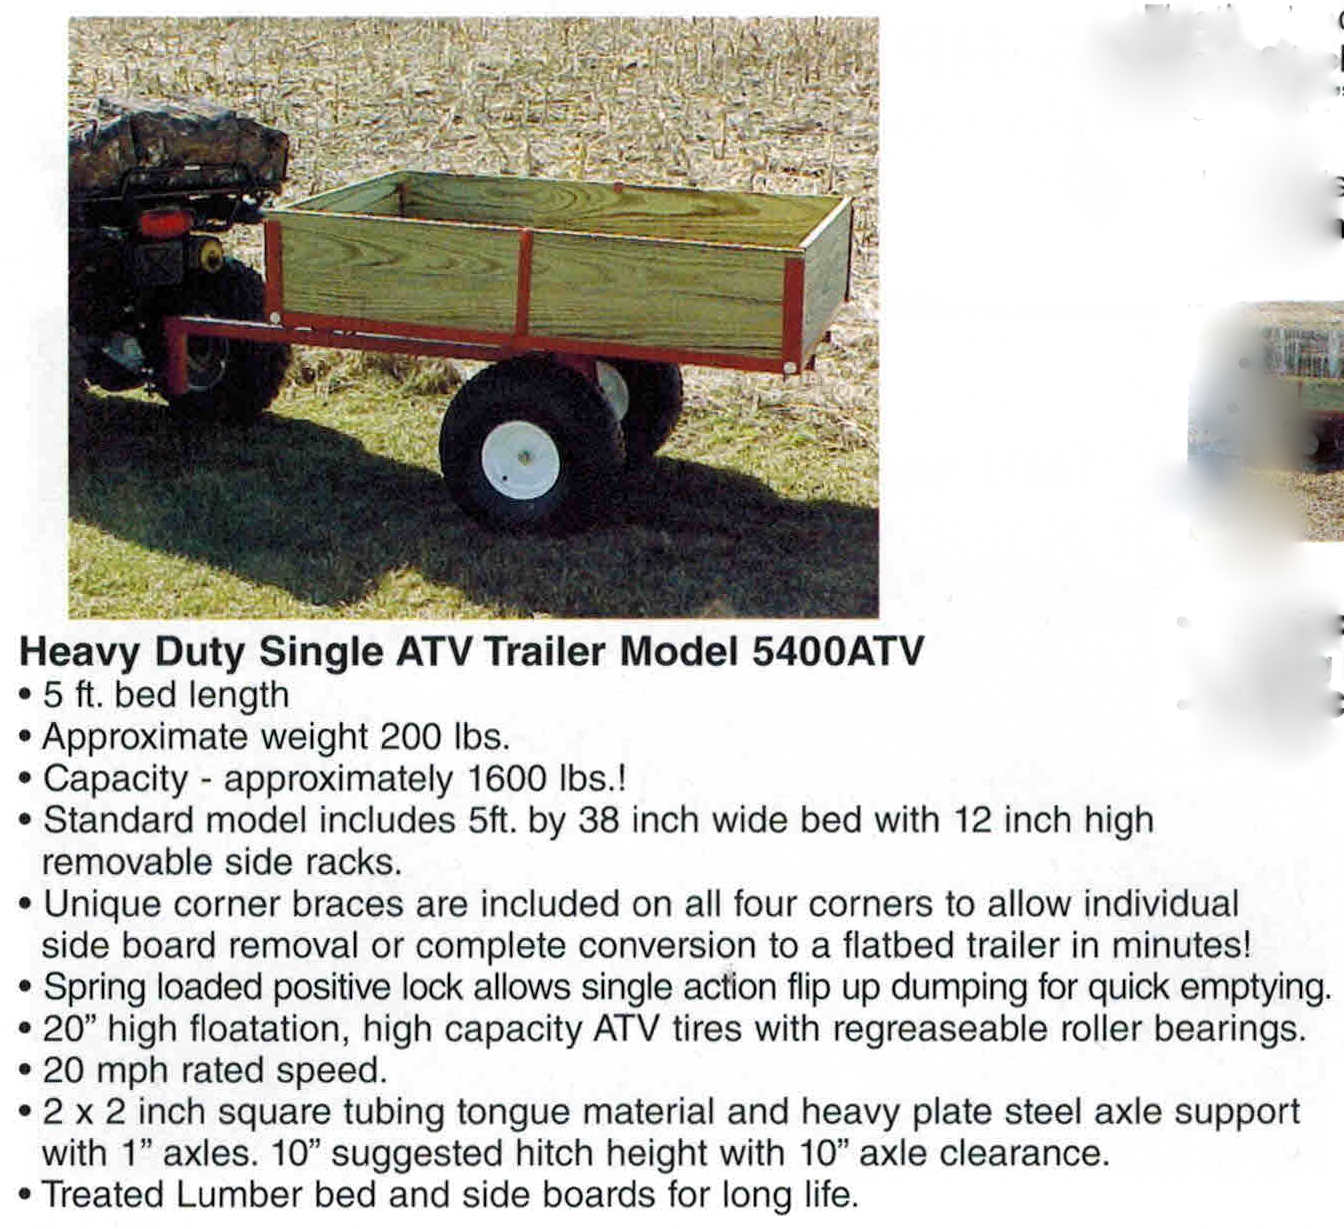 5400 Trail For Towing With An ATV, Trailer Has High Flotation Tires